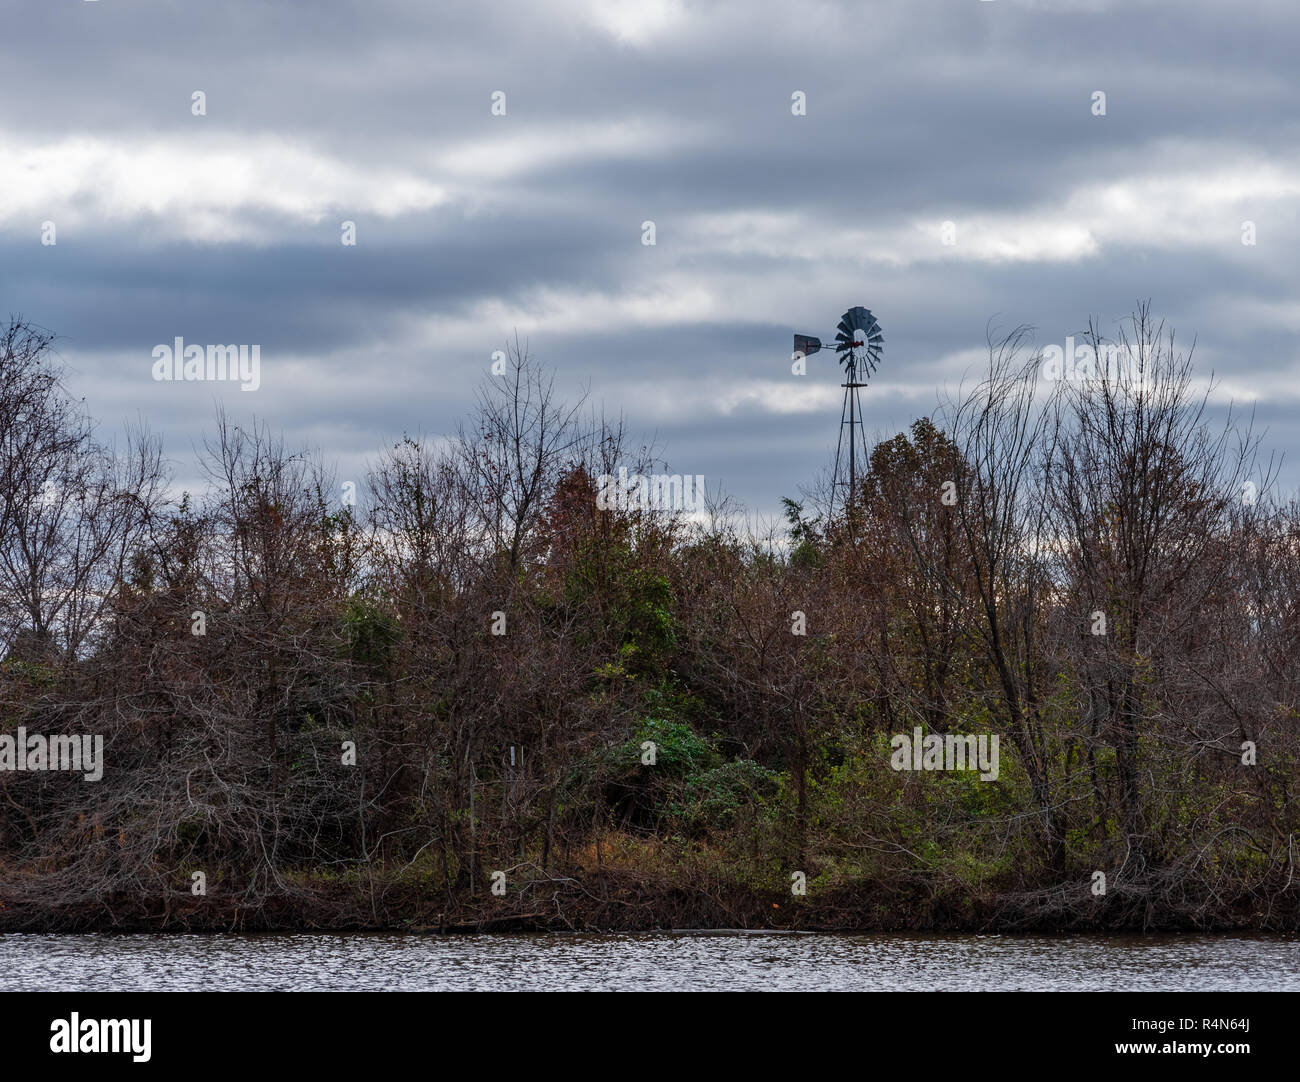 A solitary windmill stands in a field on a cold, windy and overcast  day. Stock Photo